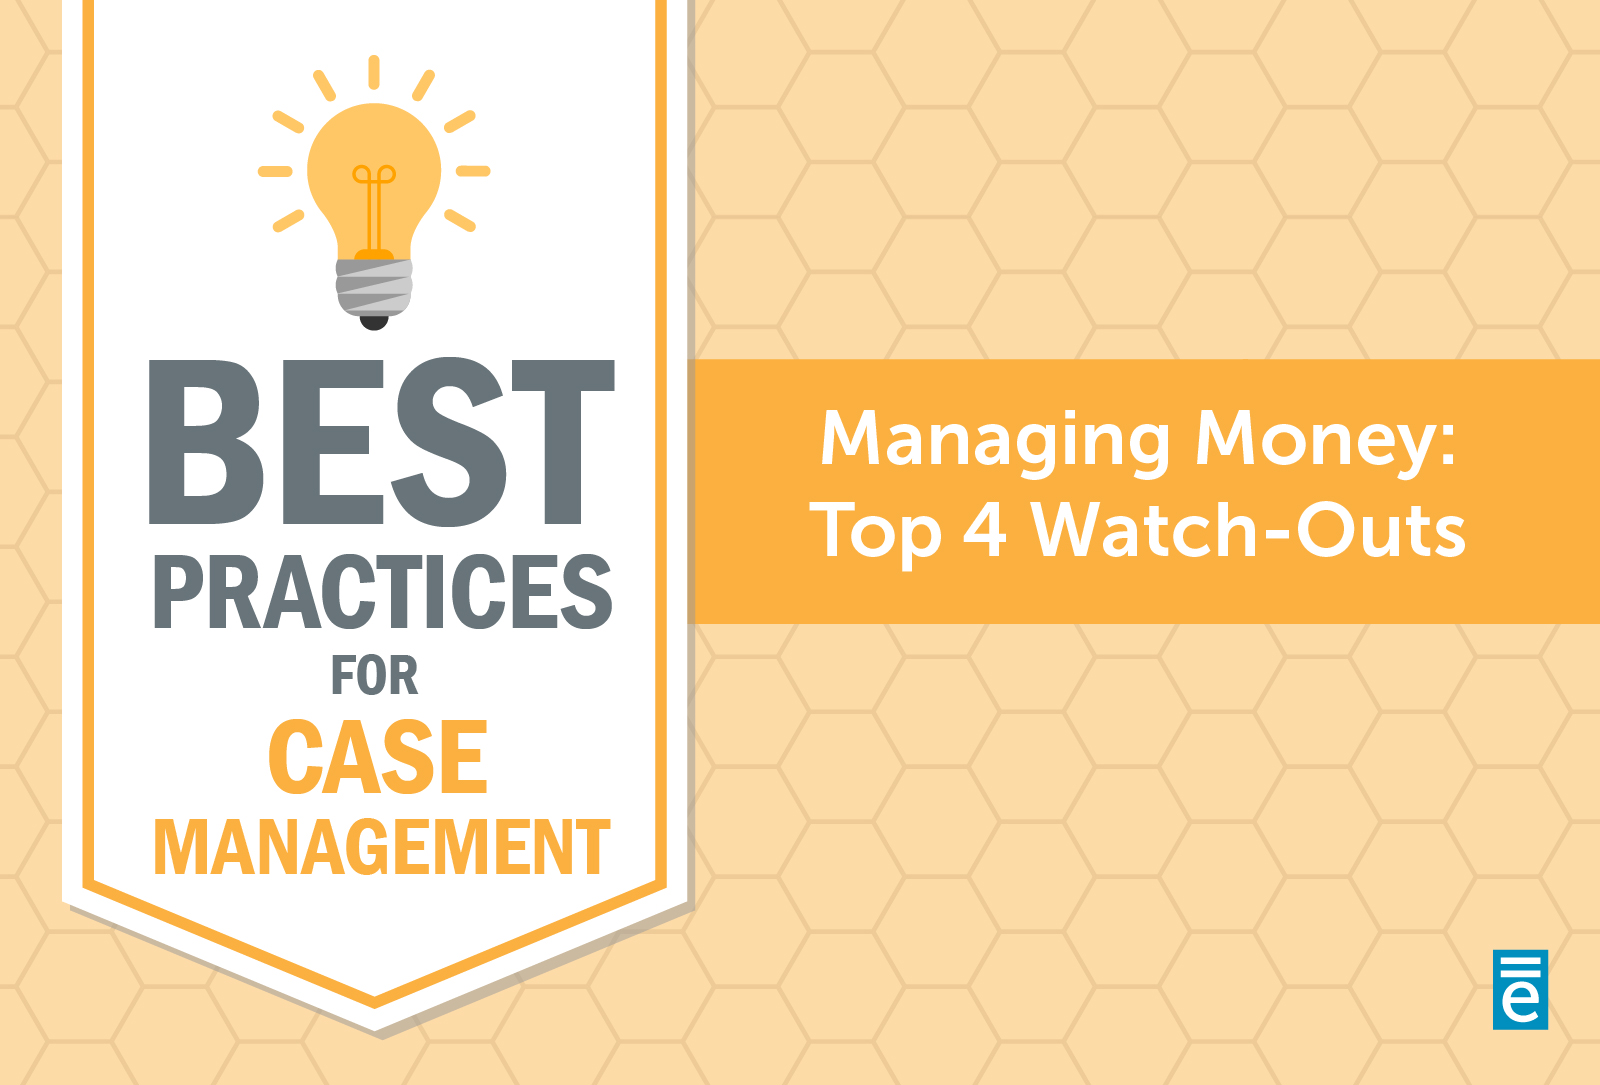 Managing Money: Top 4 Watch-Outs